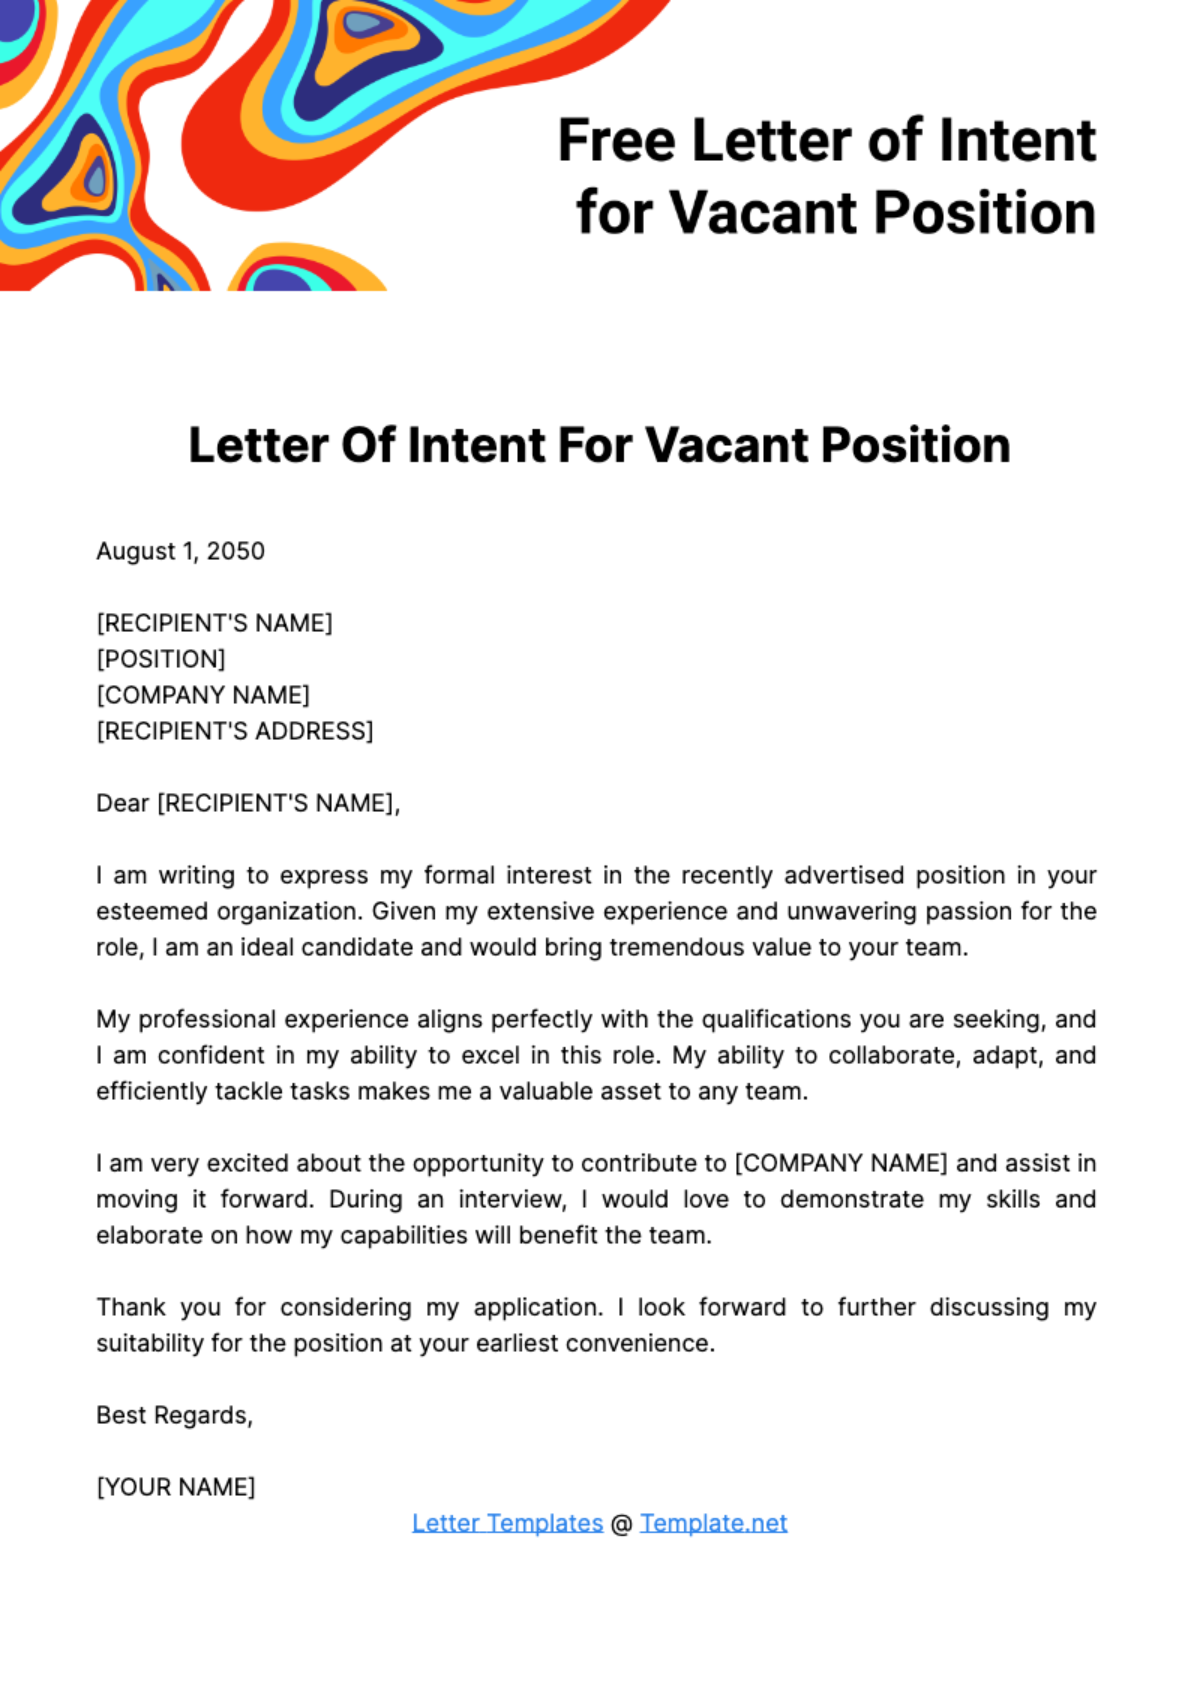 Free Letter of Intent for Vacant Position Template